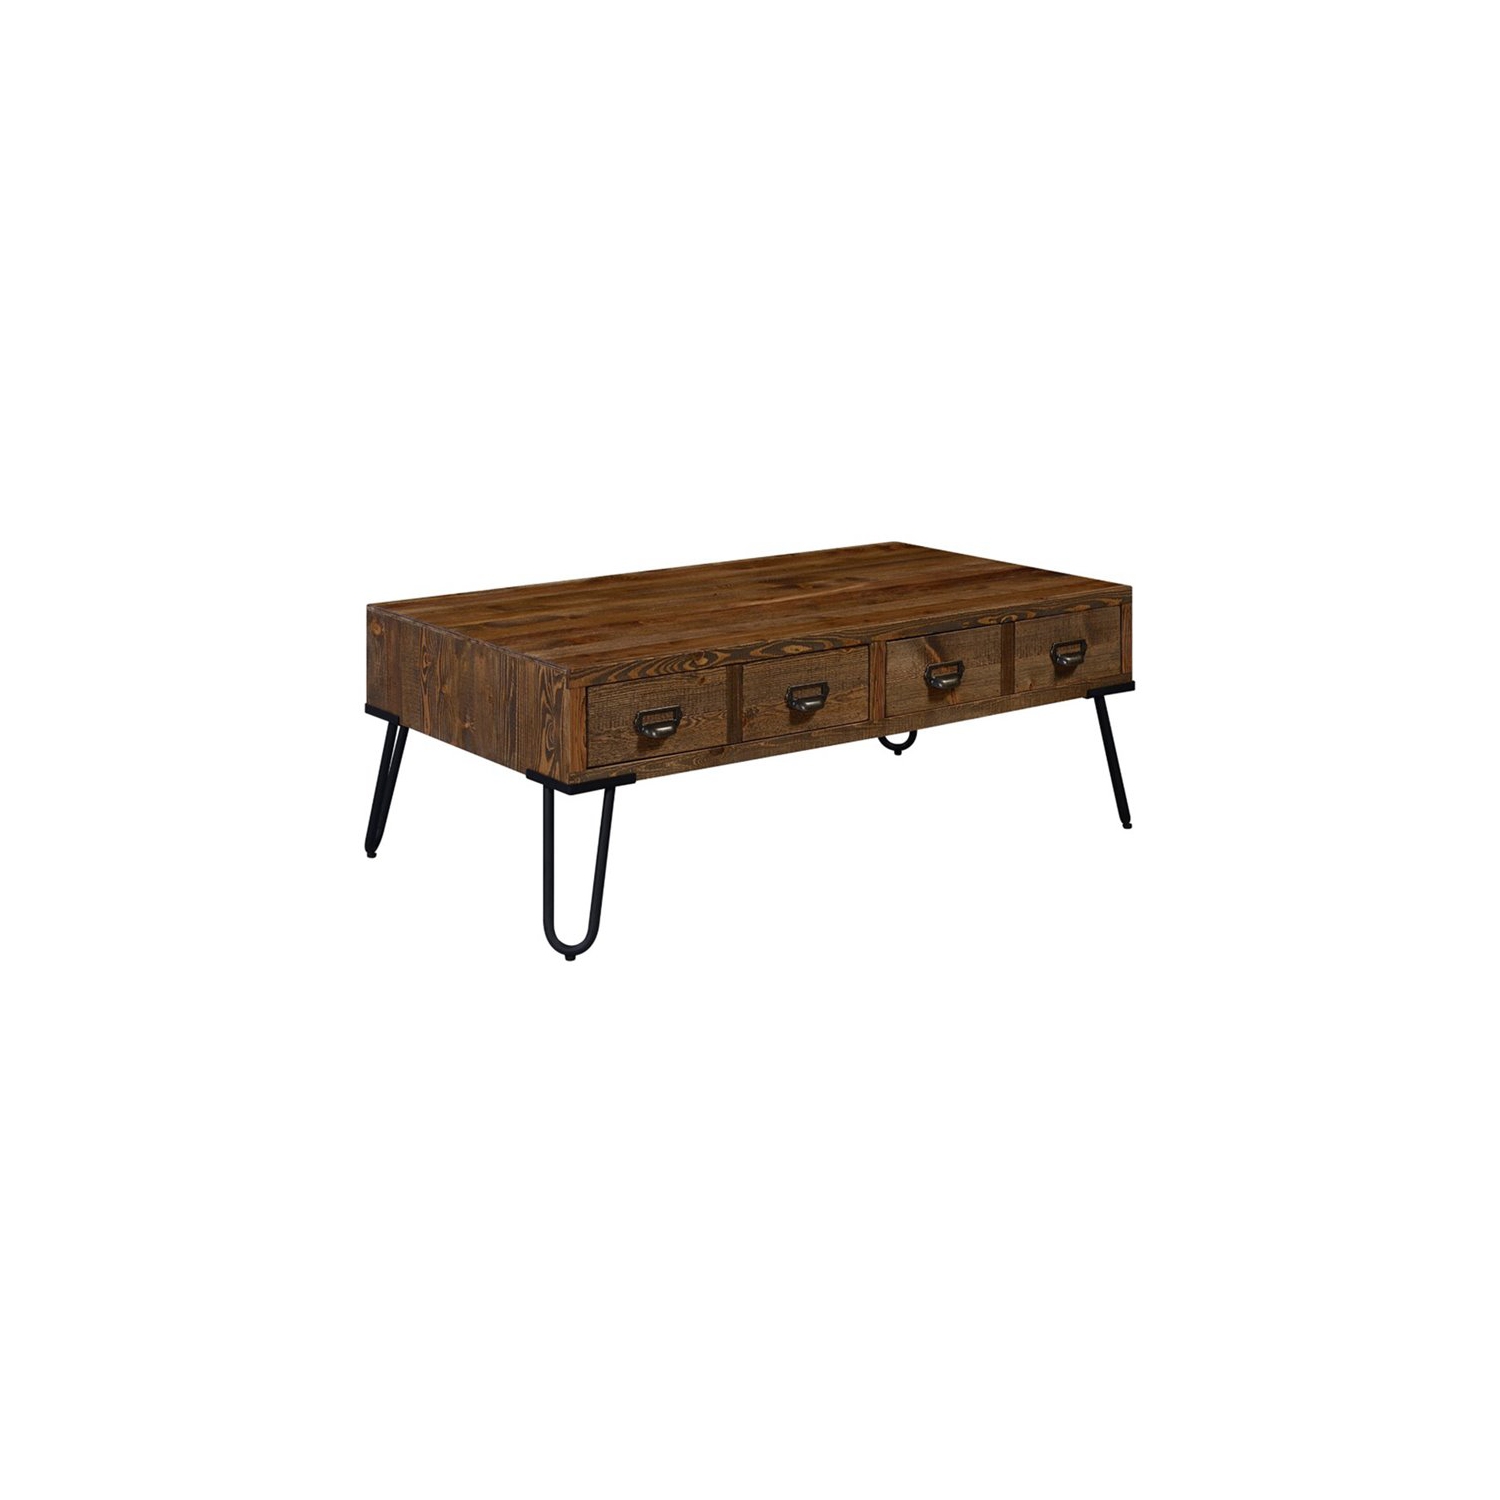 Serta at Home Bryant Storage Coffee Table in Aged Pine